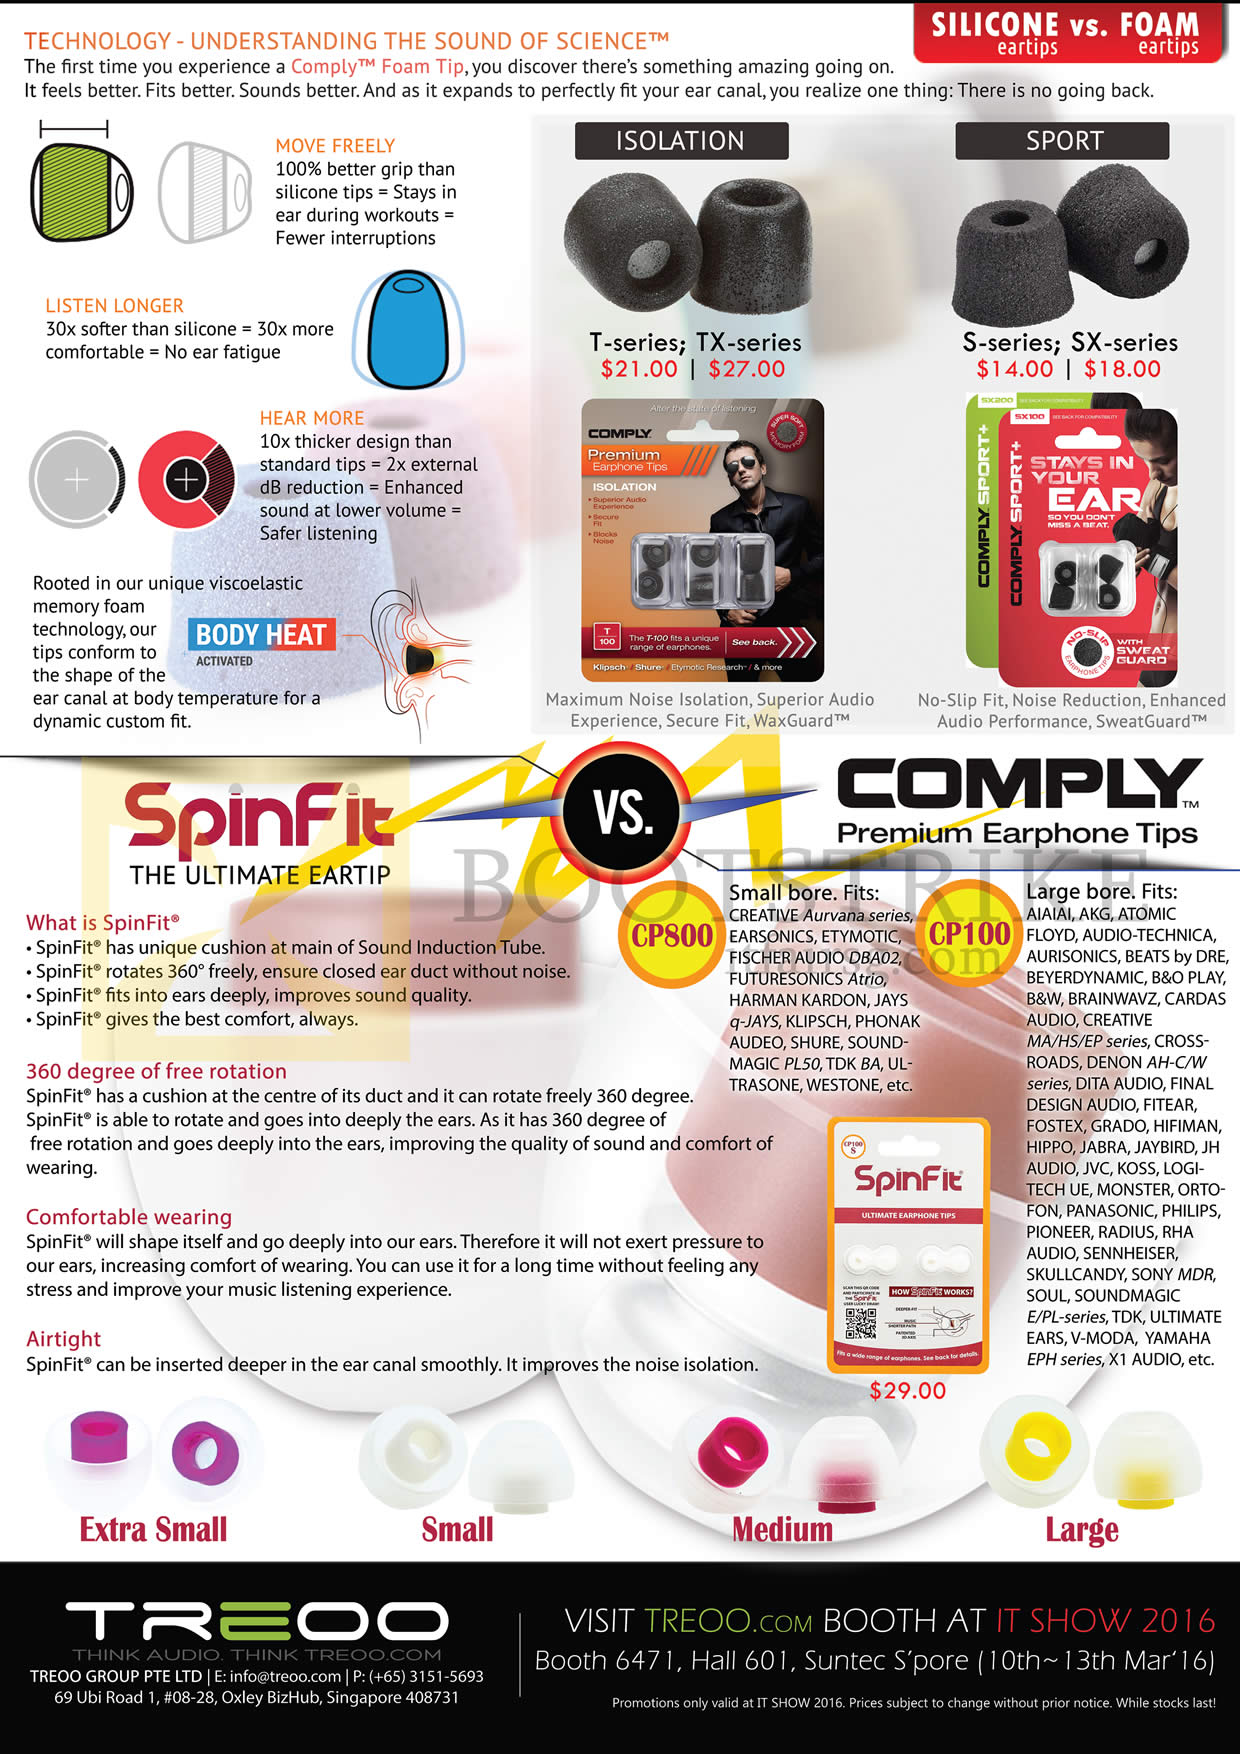 IT SHOW 2016 price list image brochure of Treoo Earphones Spinfit Vs Comply, Silicone Vs Foam